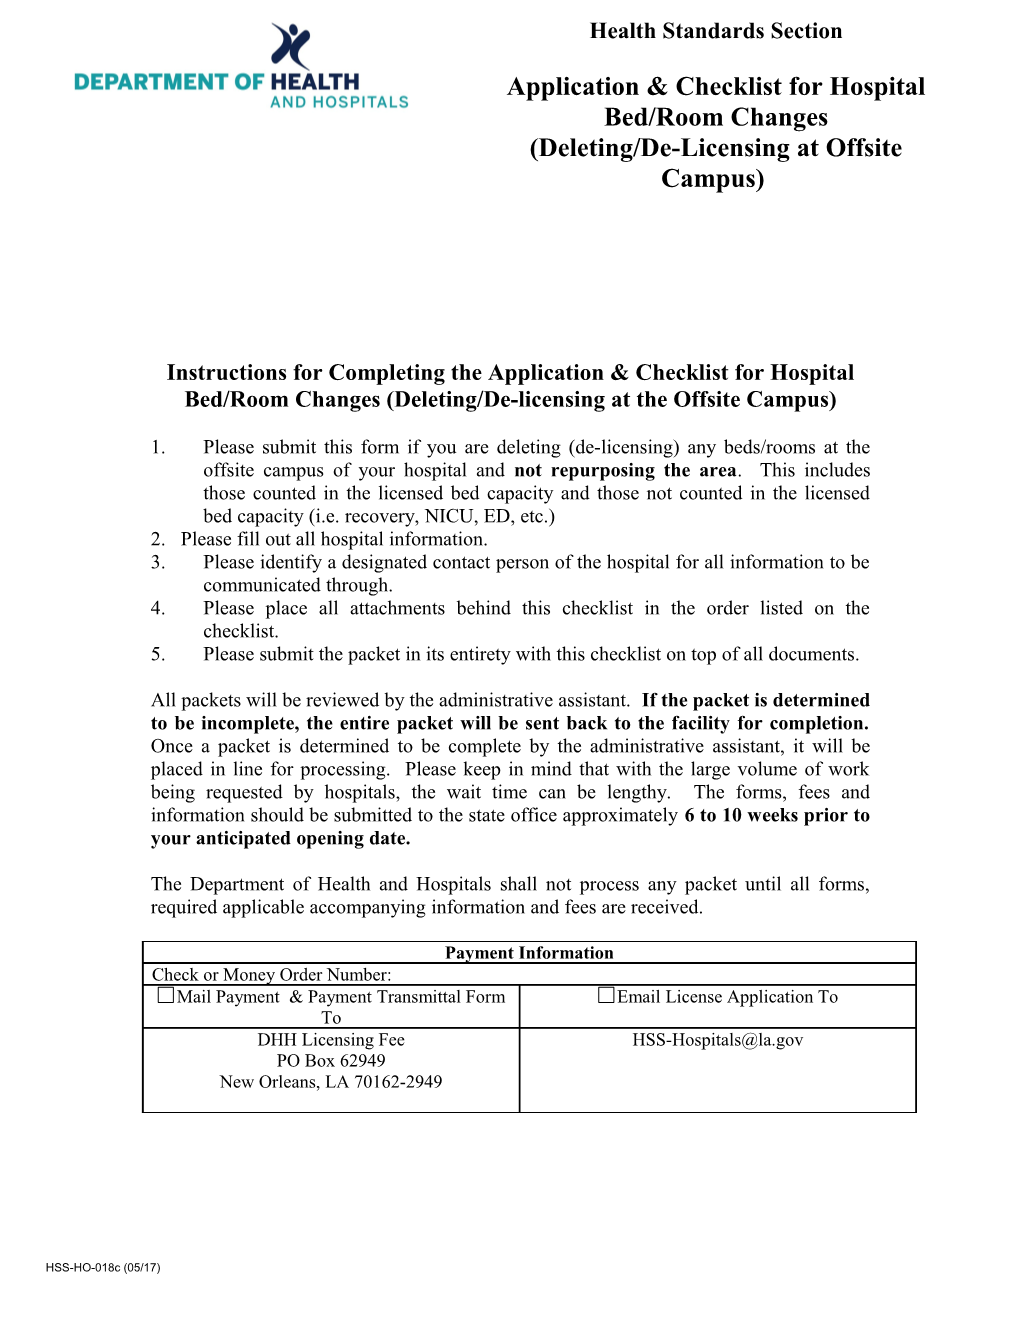 Instructions for Completing the Application & Checklist for Hospital Bed/Room Changes